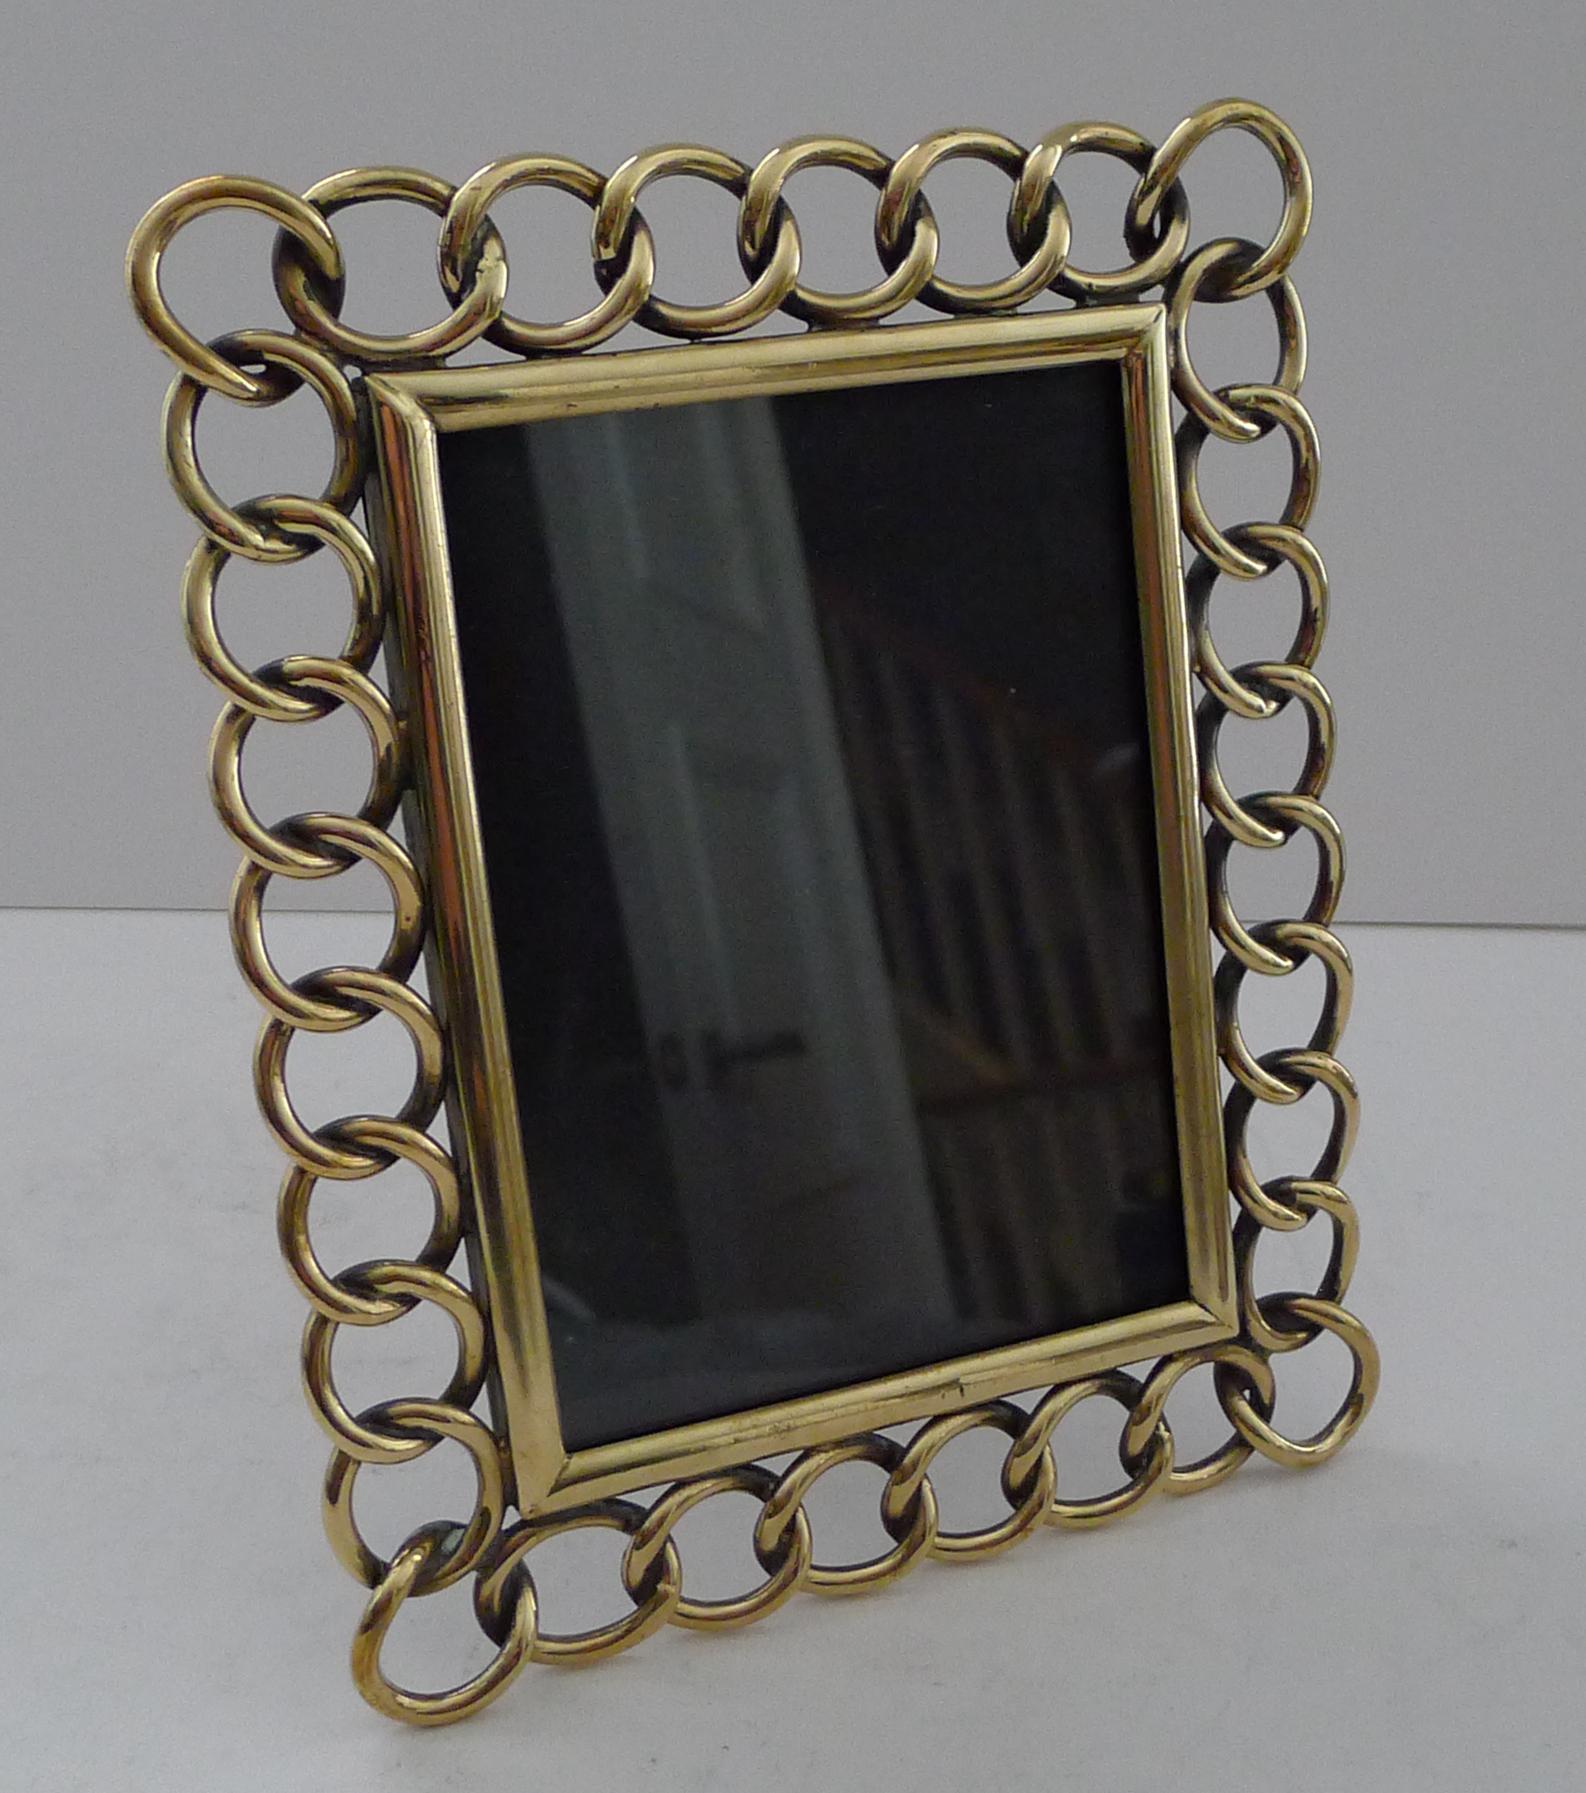 Late Victorian Heavy Cast Antique English Brass Wedding Ring Photograph Frame c.1890 For Sale